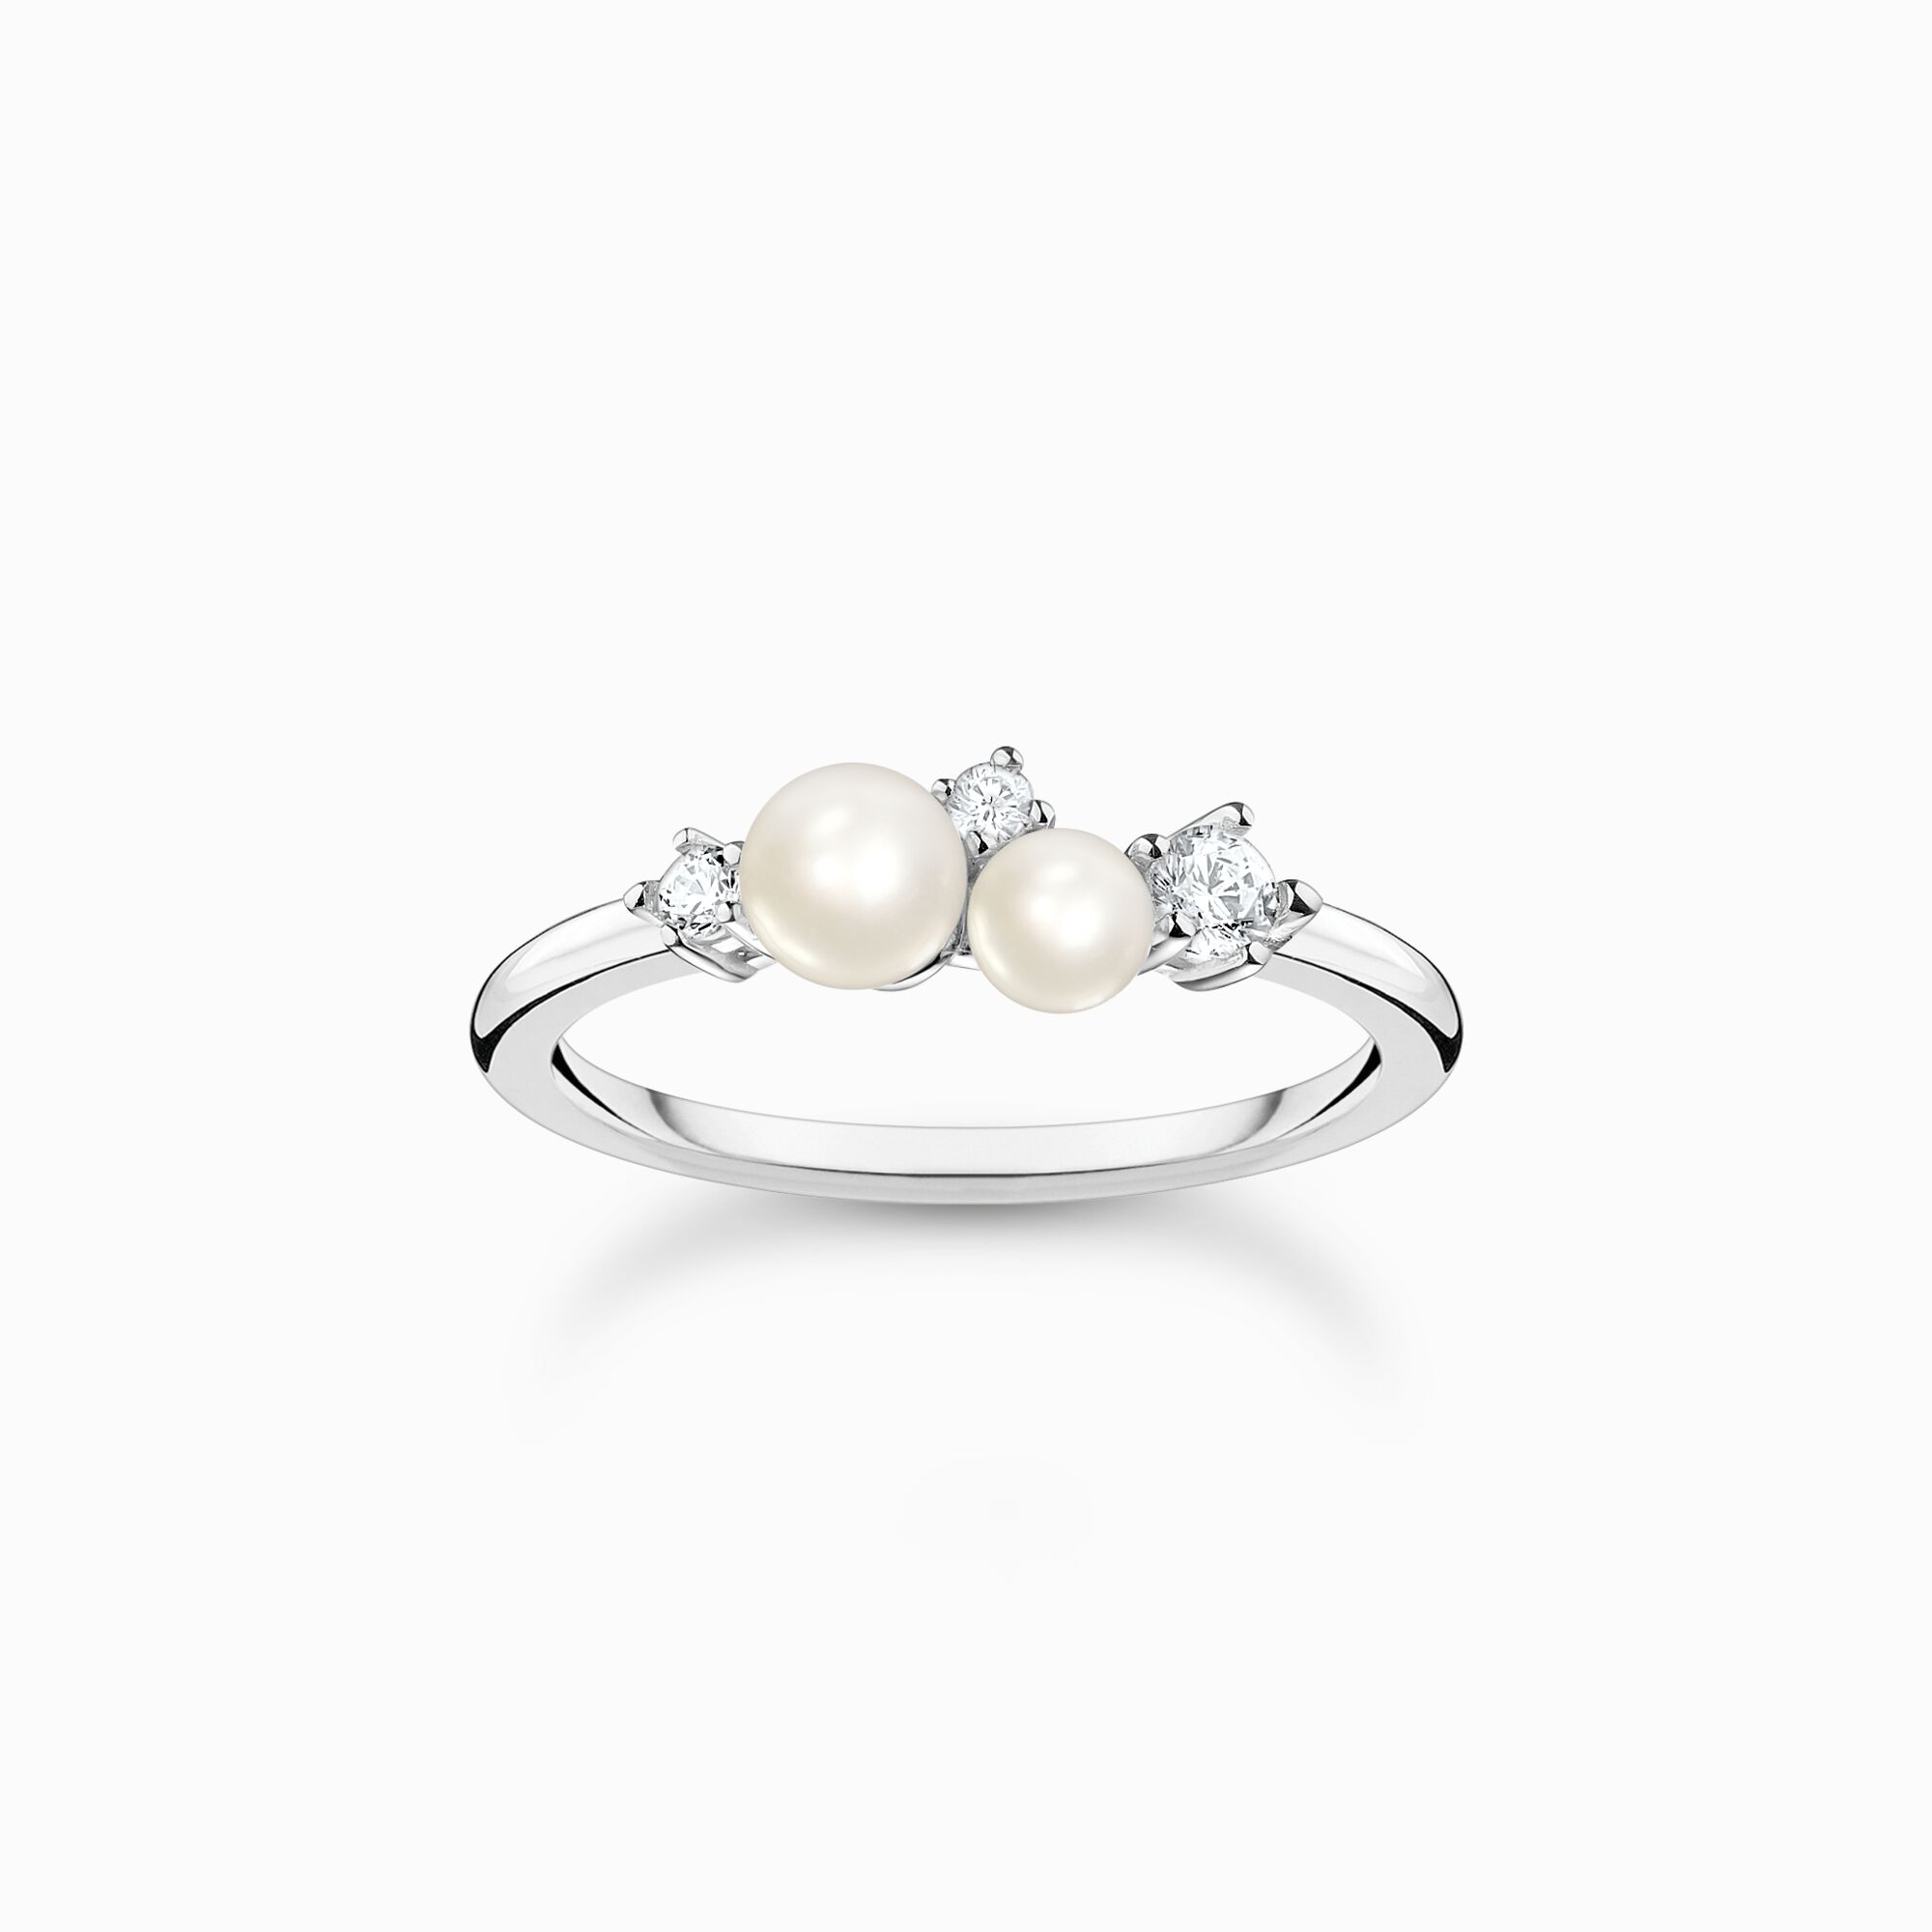 Ring pearls with white stones silver from the Charming Collection collection in the THOMAS SABO online store